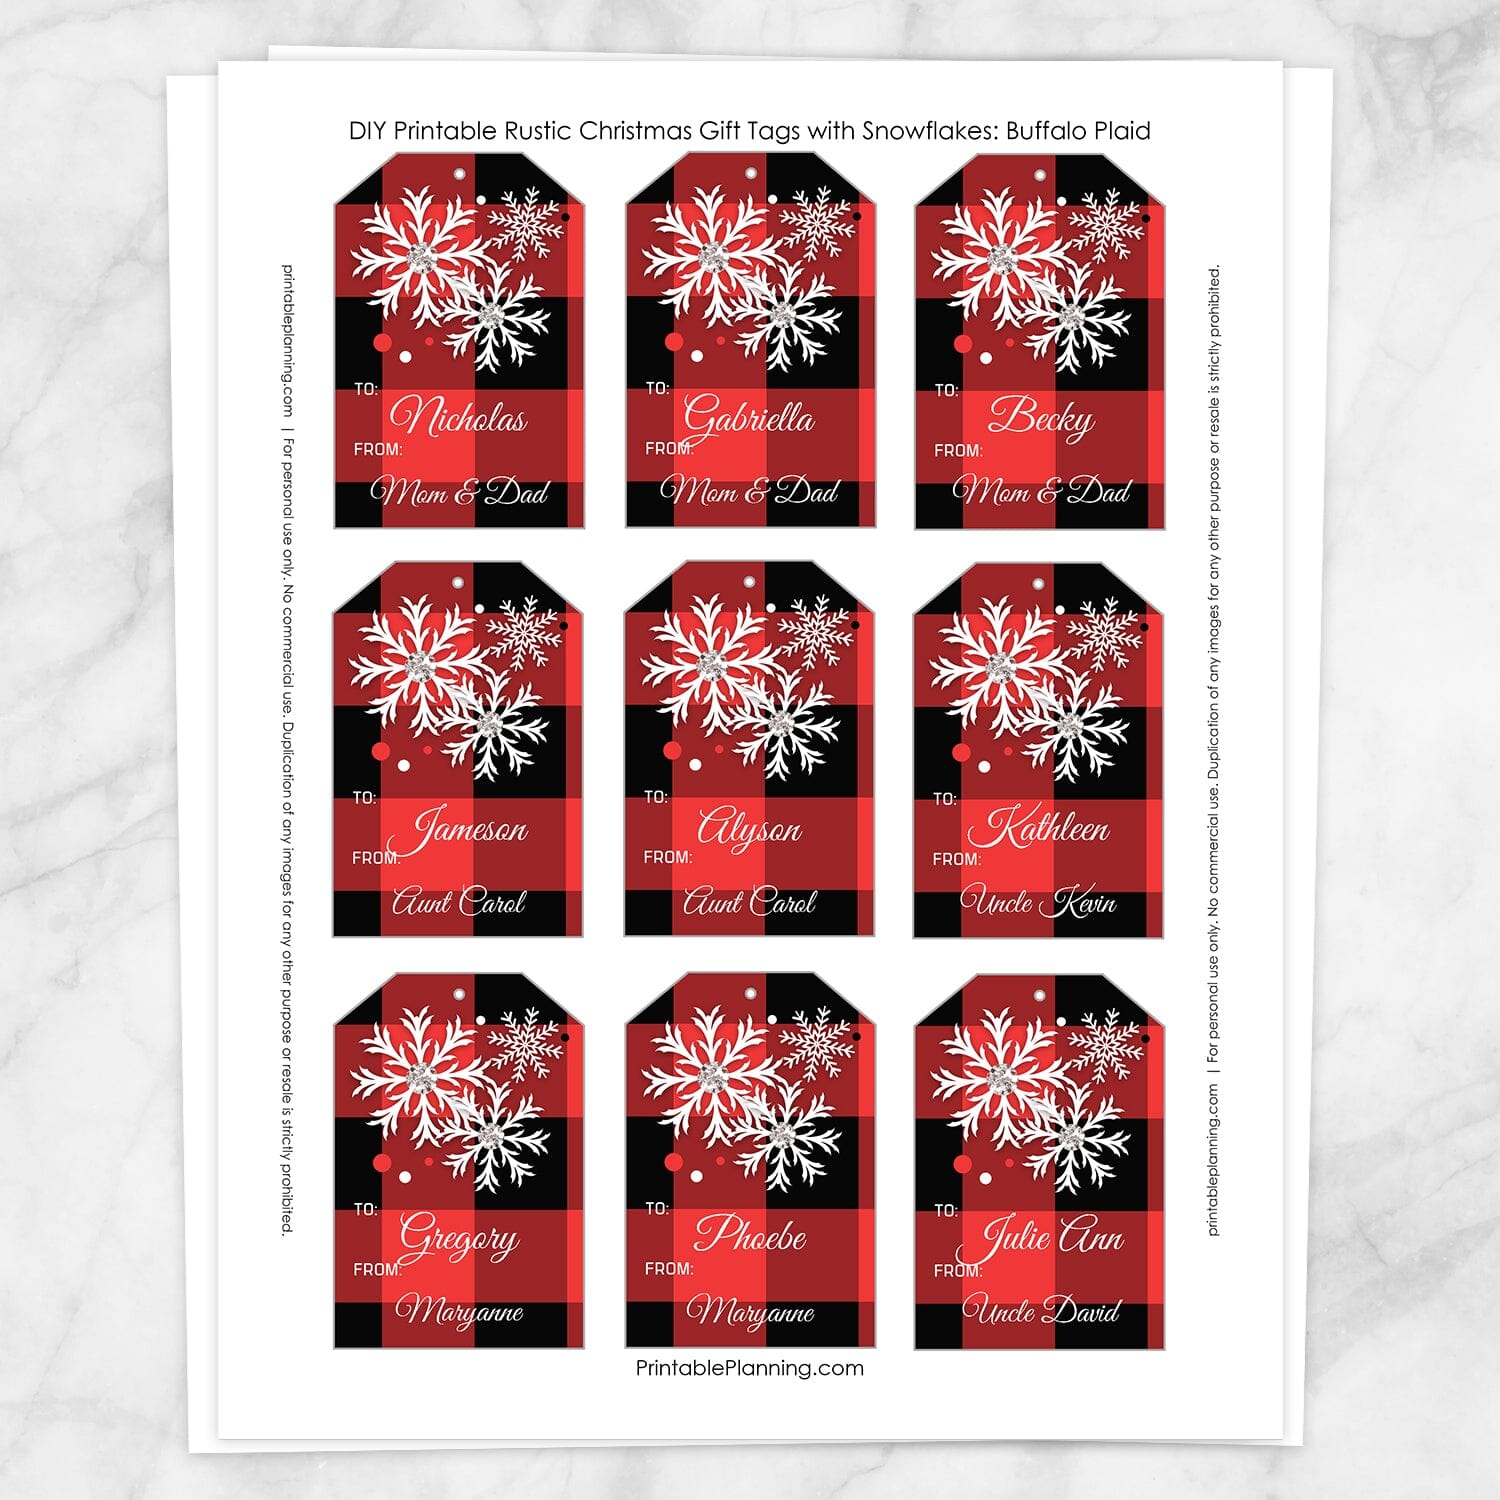 Printable Personalized Red Buffalo Plaid Gift Tags at Printable Planning. Sheet of 9 gift tags.